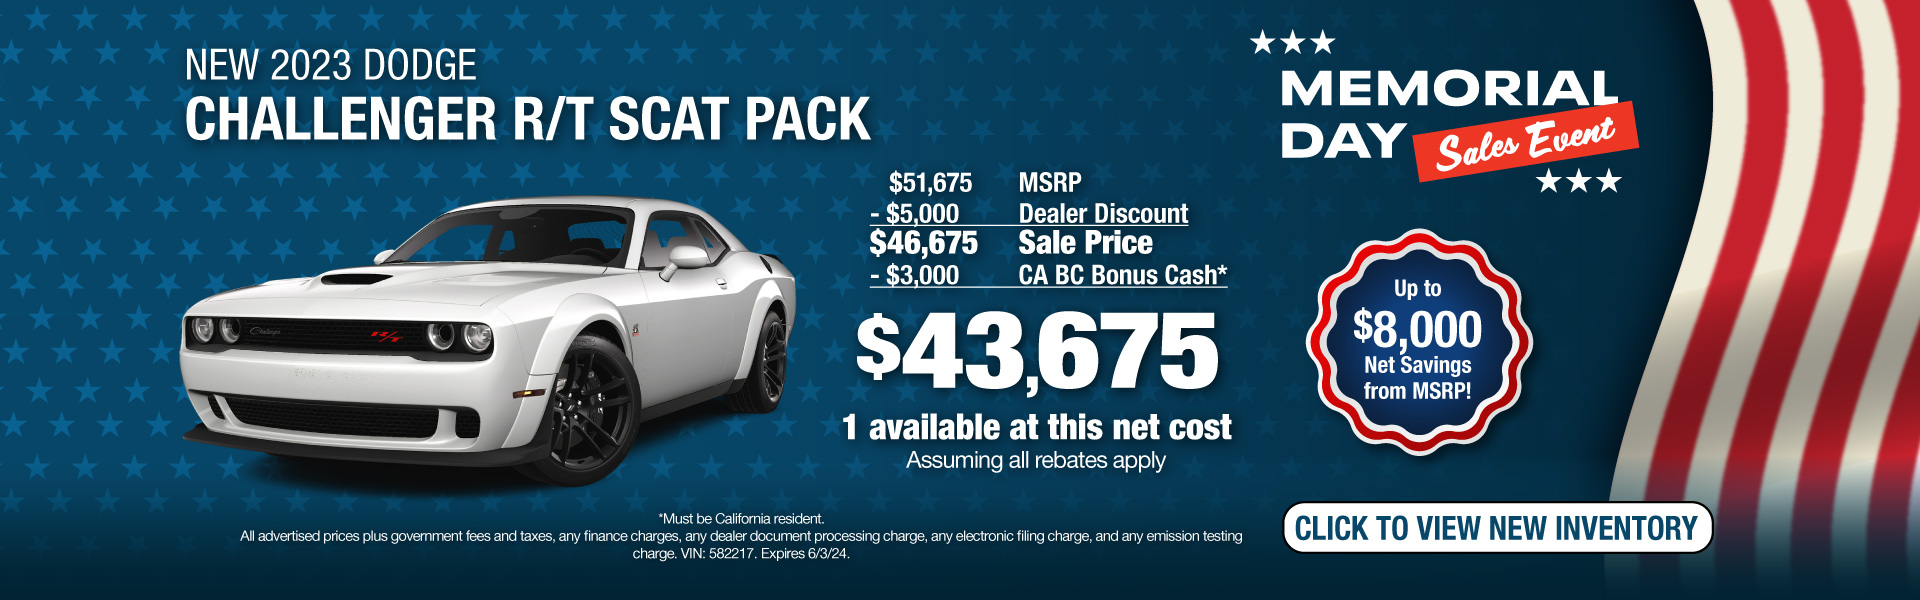 Get a New 2023 Dodge Challenger R/T Scat Pack for $43,675 Net Cost. Expires 6/3/24.